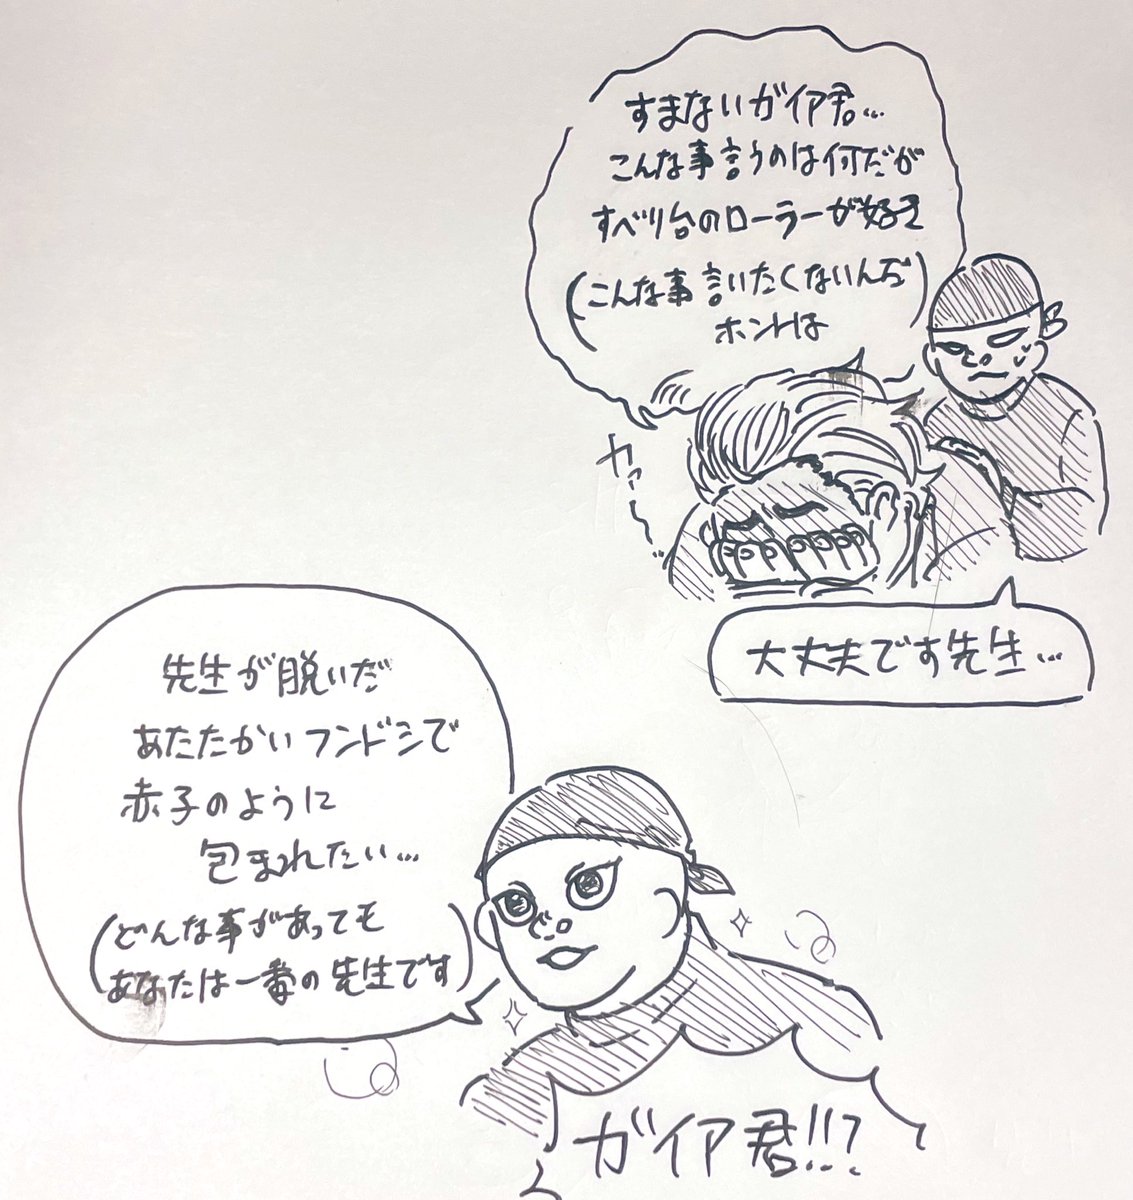 Y談おじさんのY談波を浴びる本部とガイア https://t.co/NuqEAiF4l0 